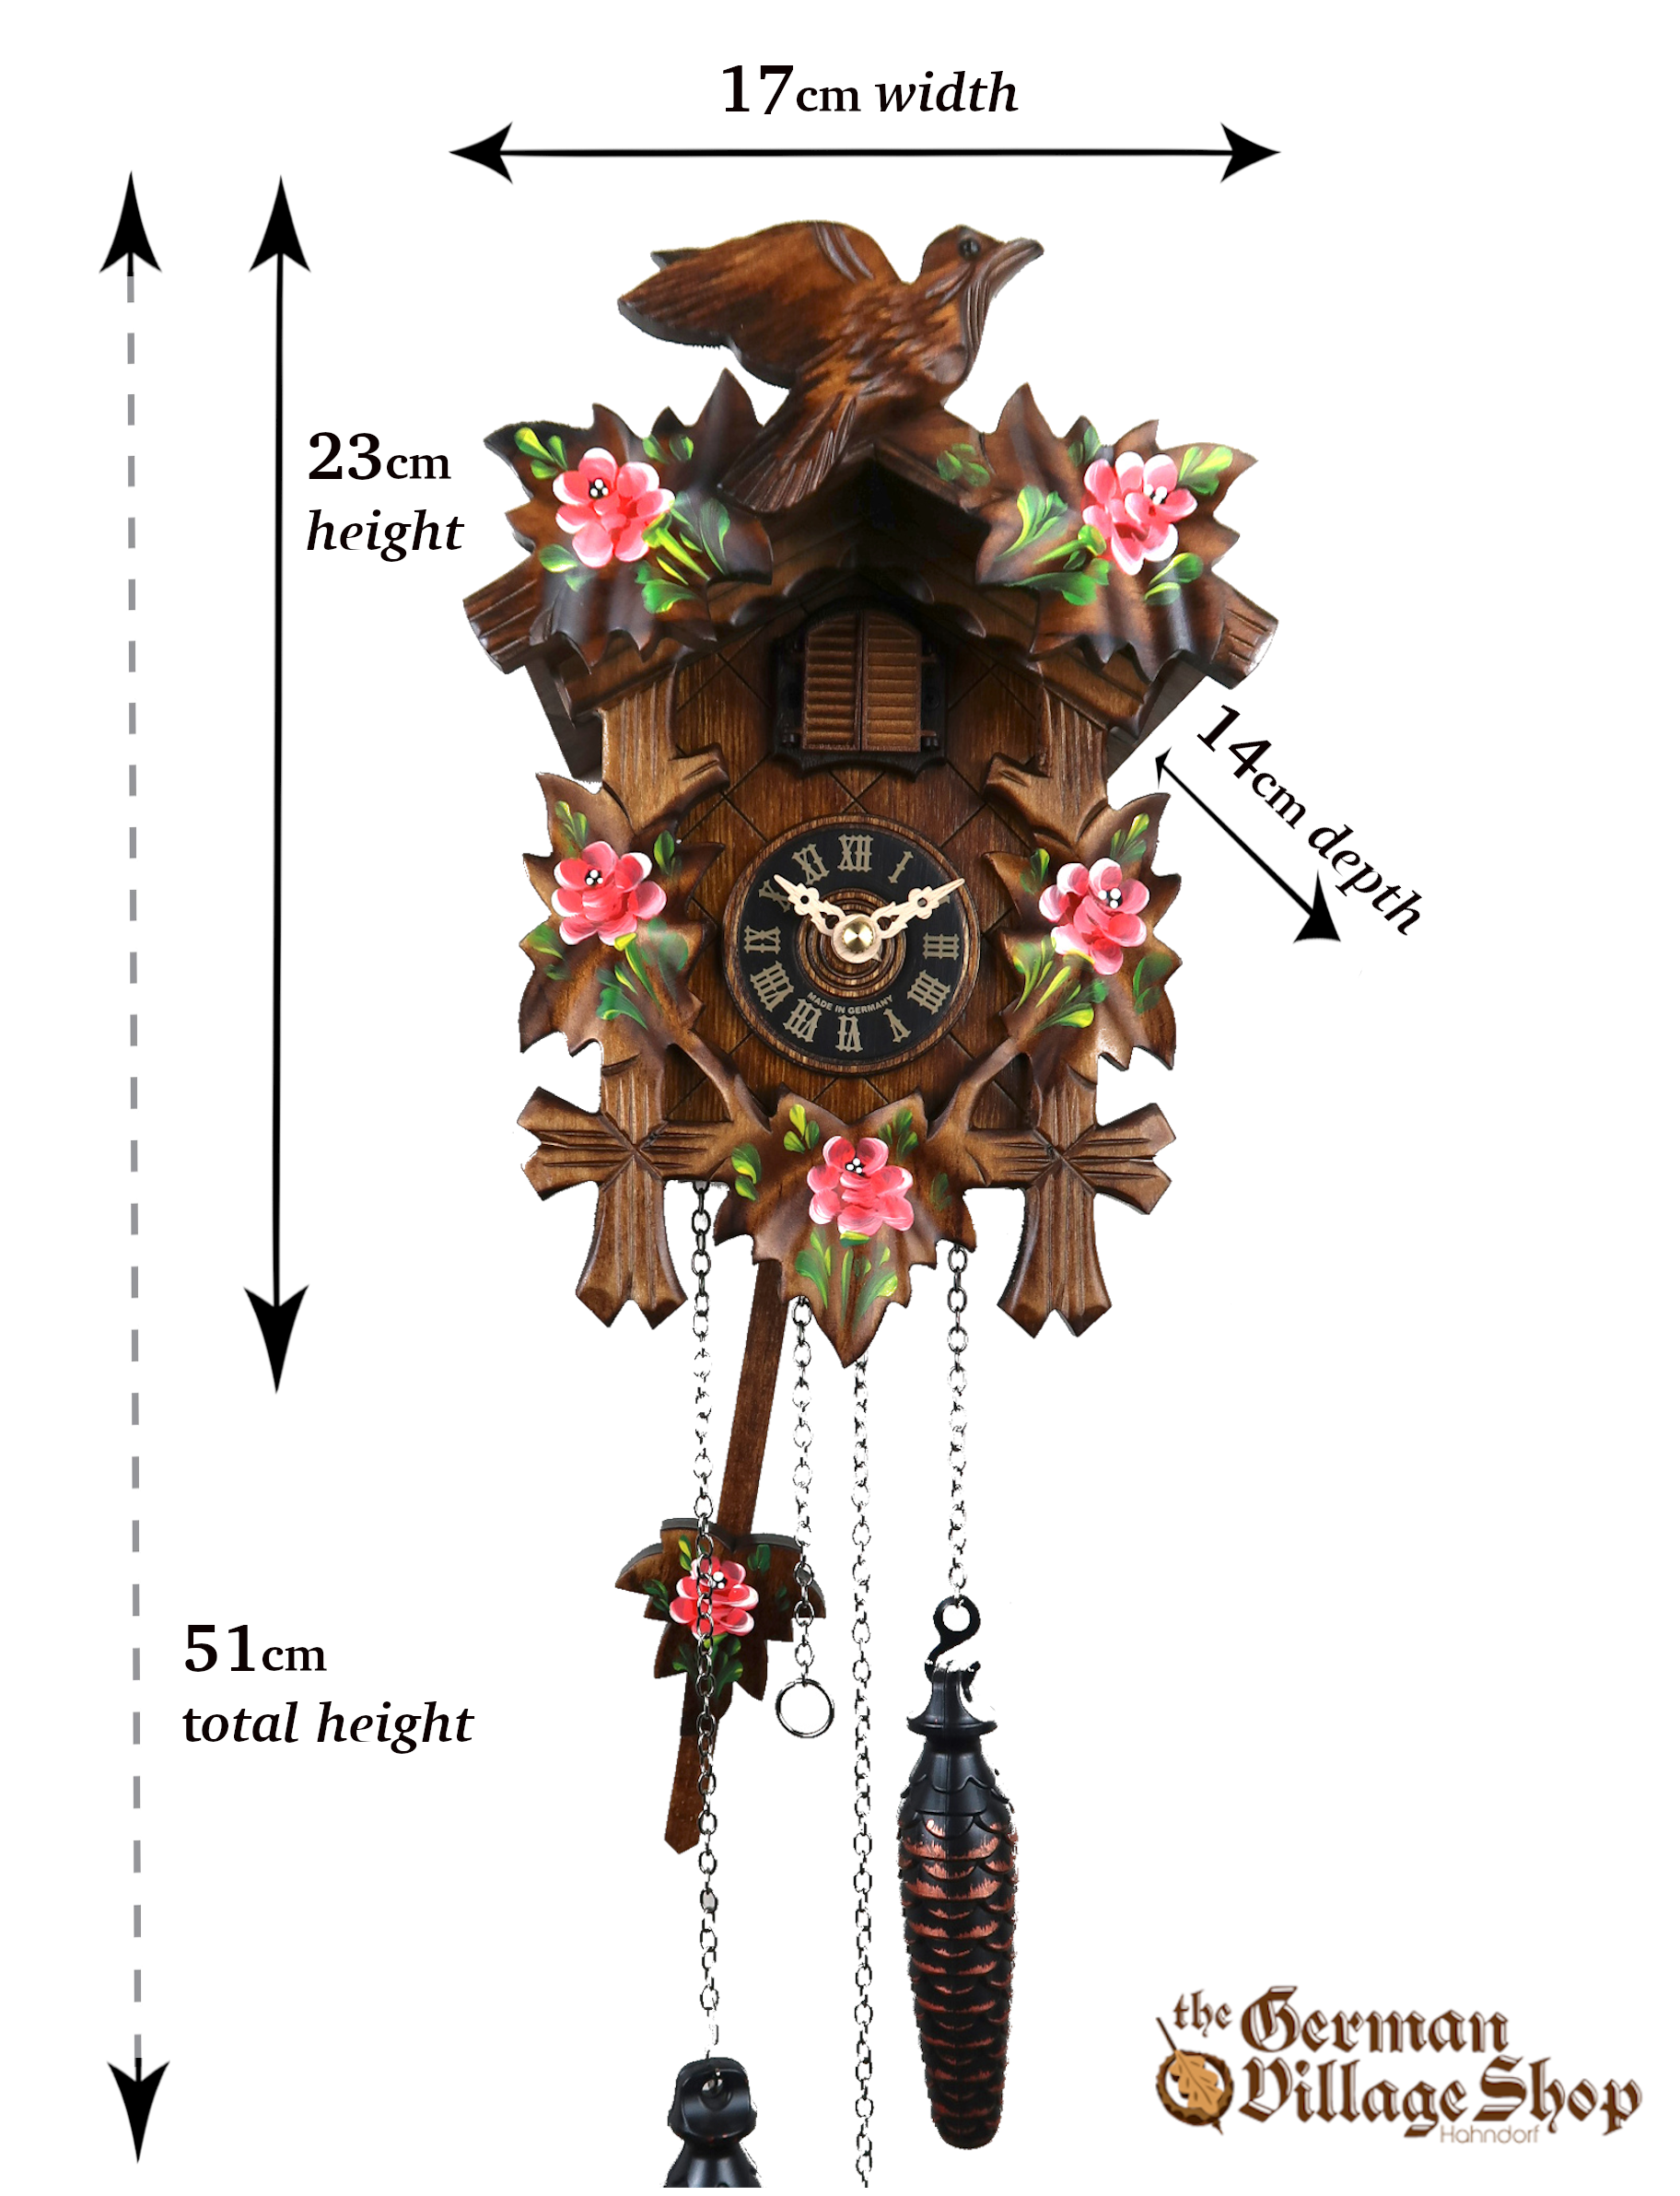 German Cuckoo Clock imported and for sale in Australia